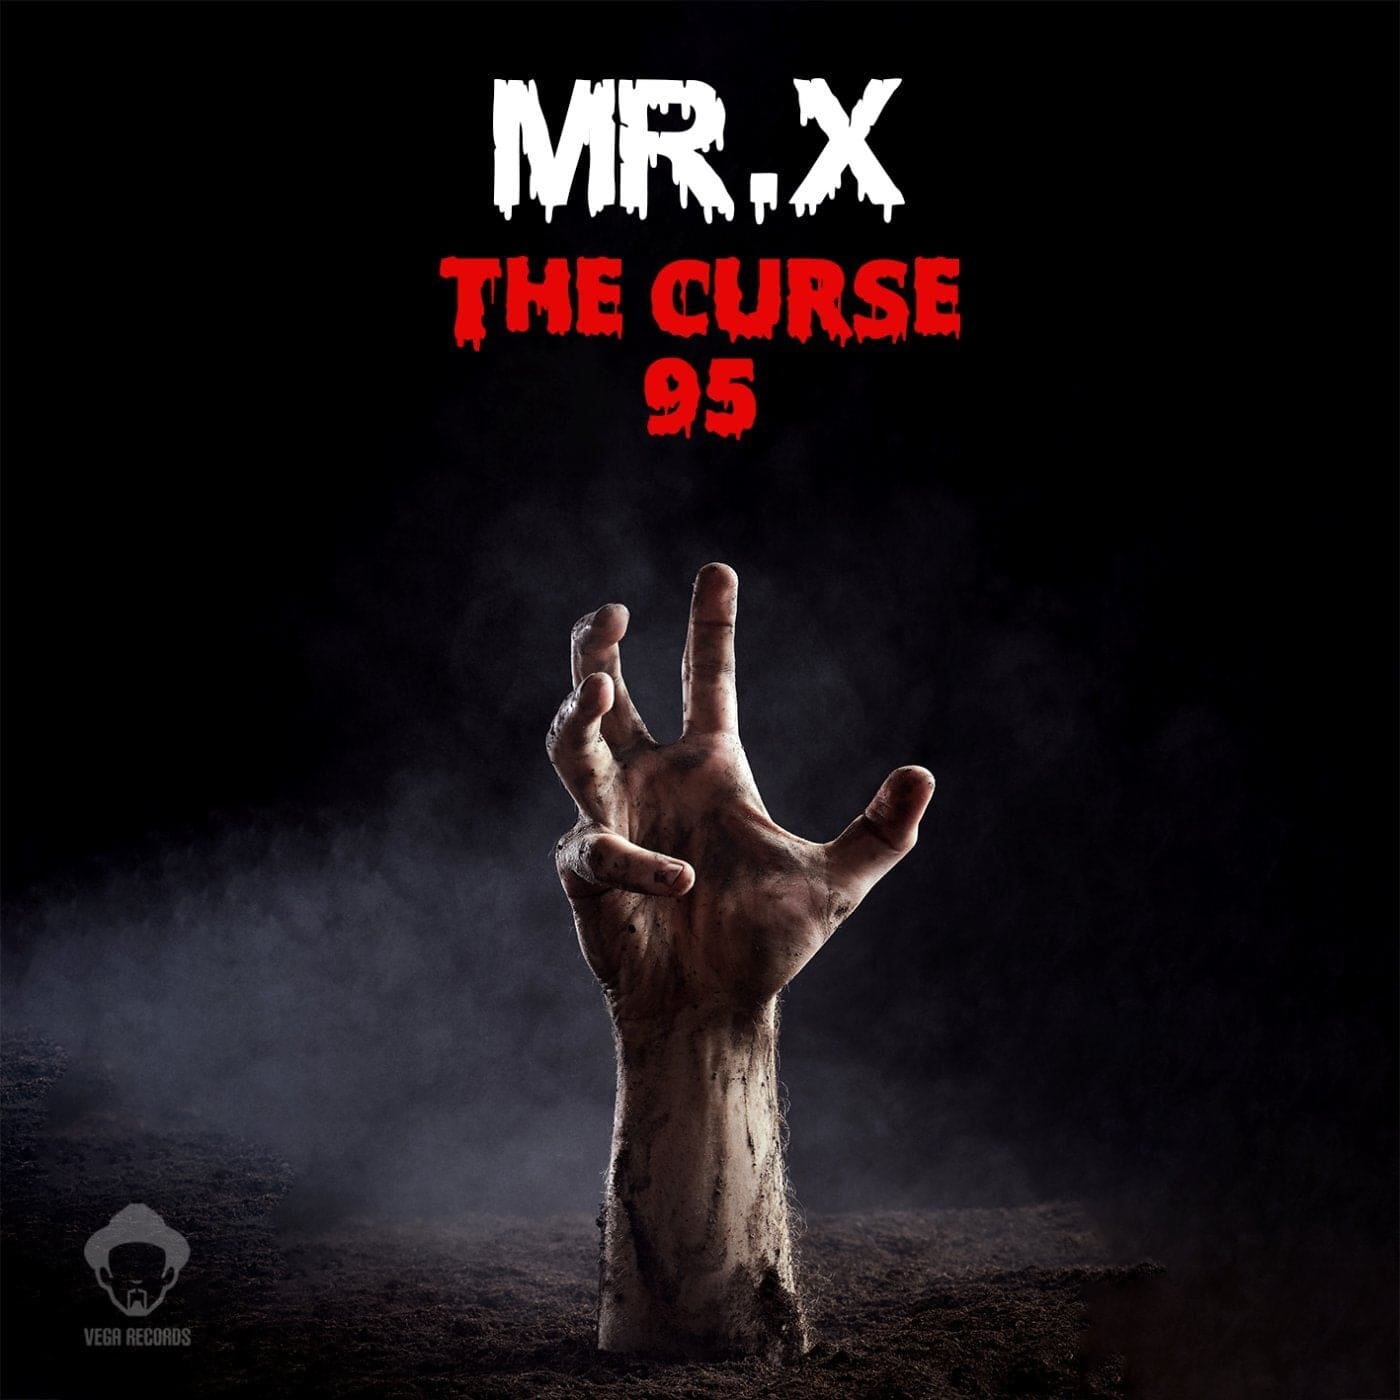 image cover: Mr. X - The Curse / VR213